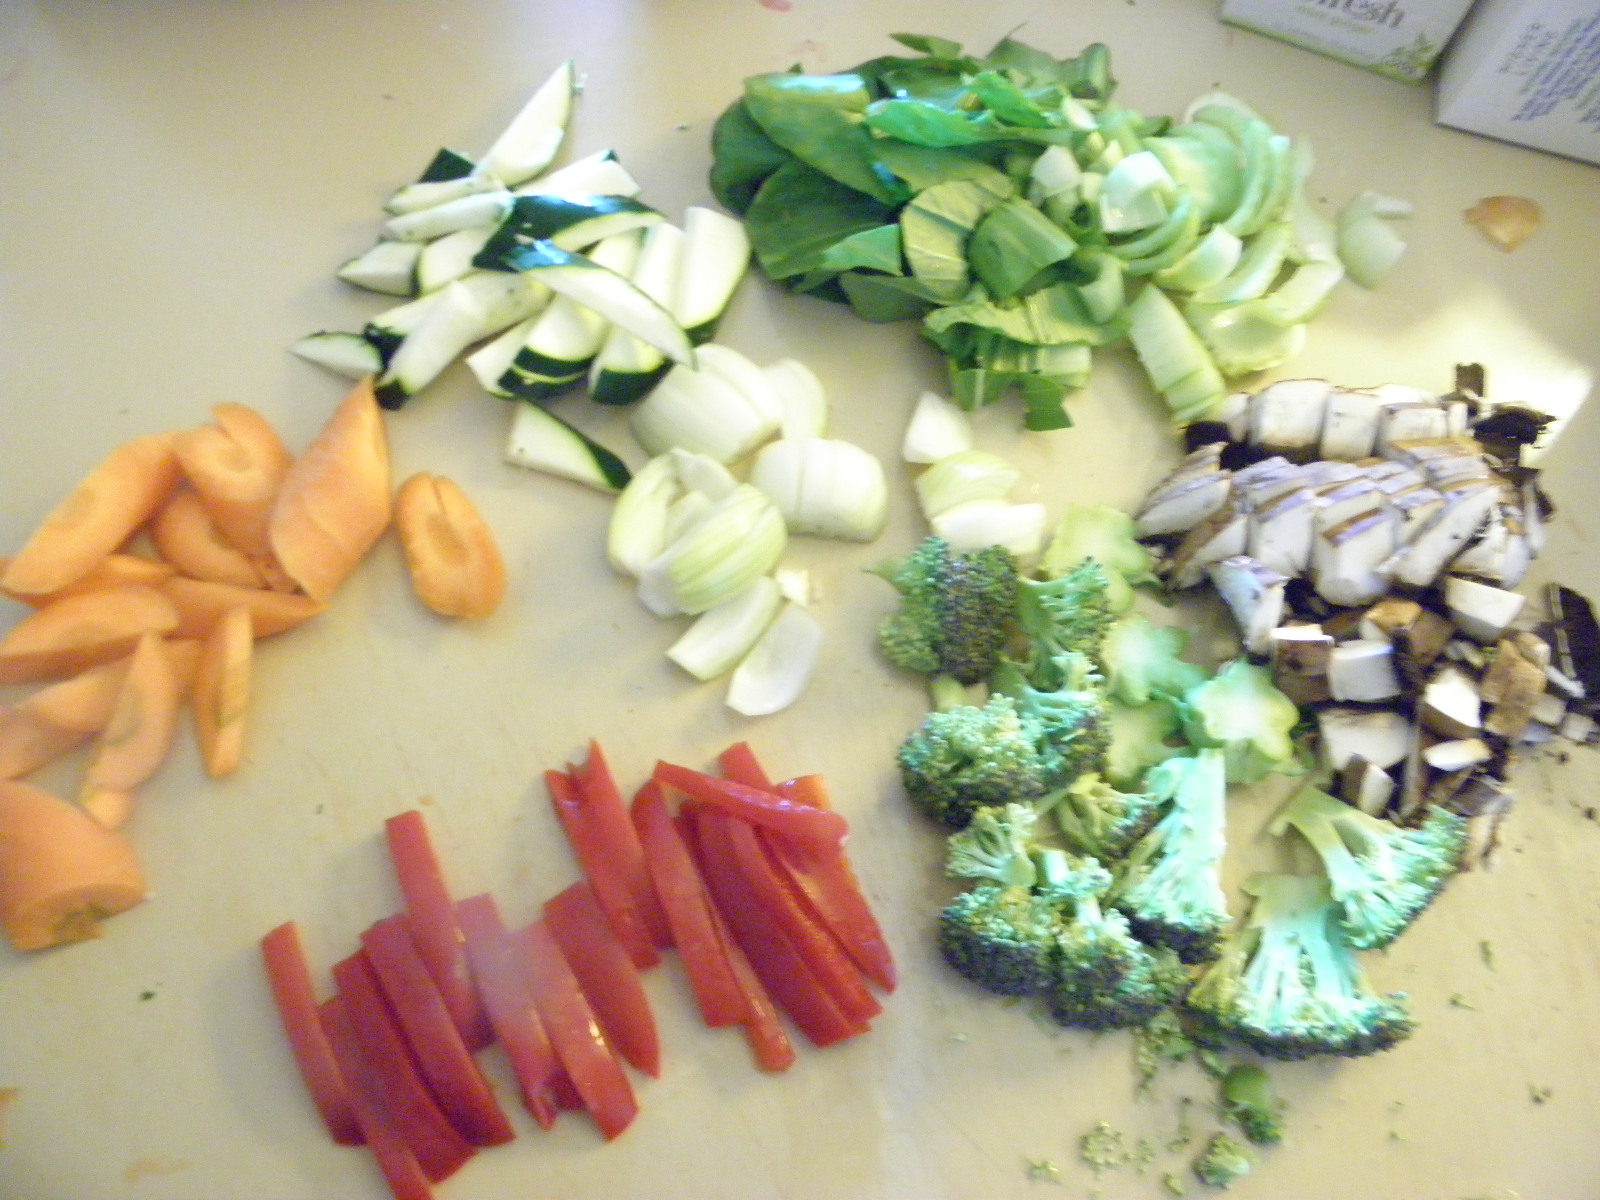 cut up veges for stirfry